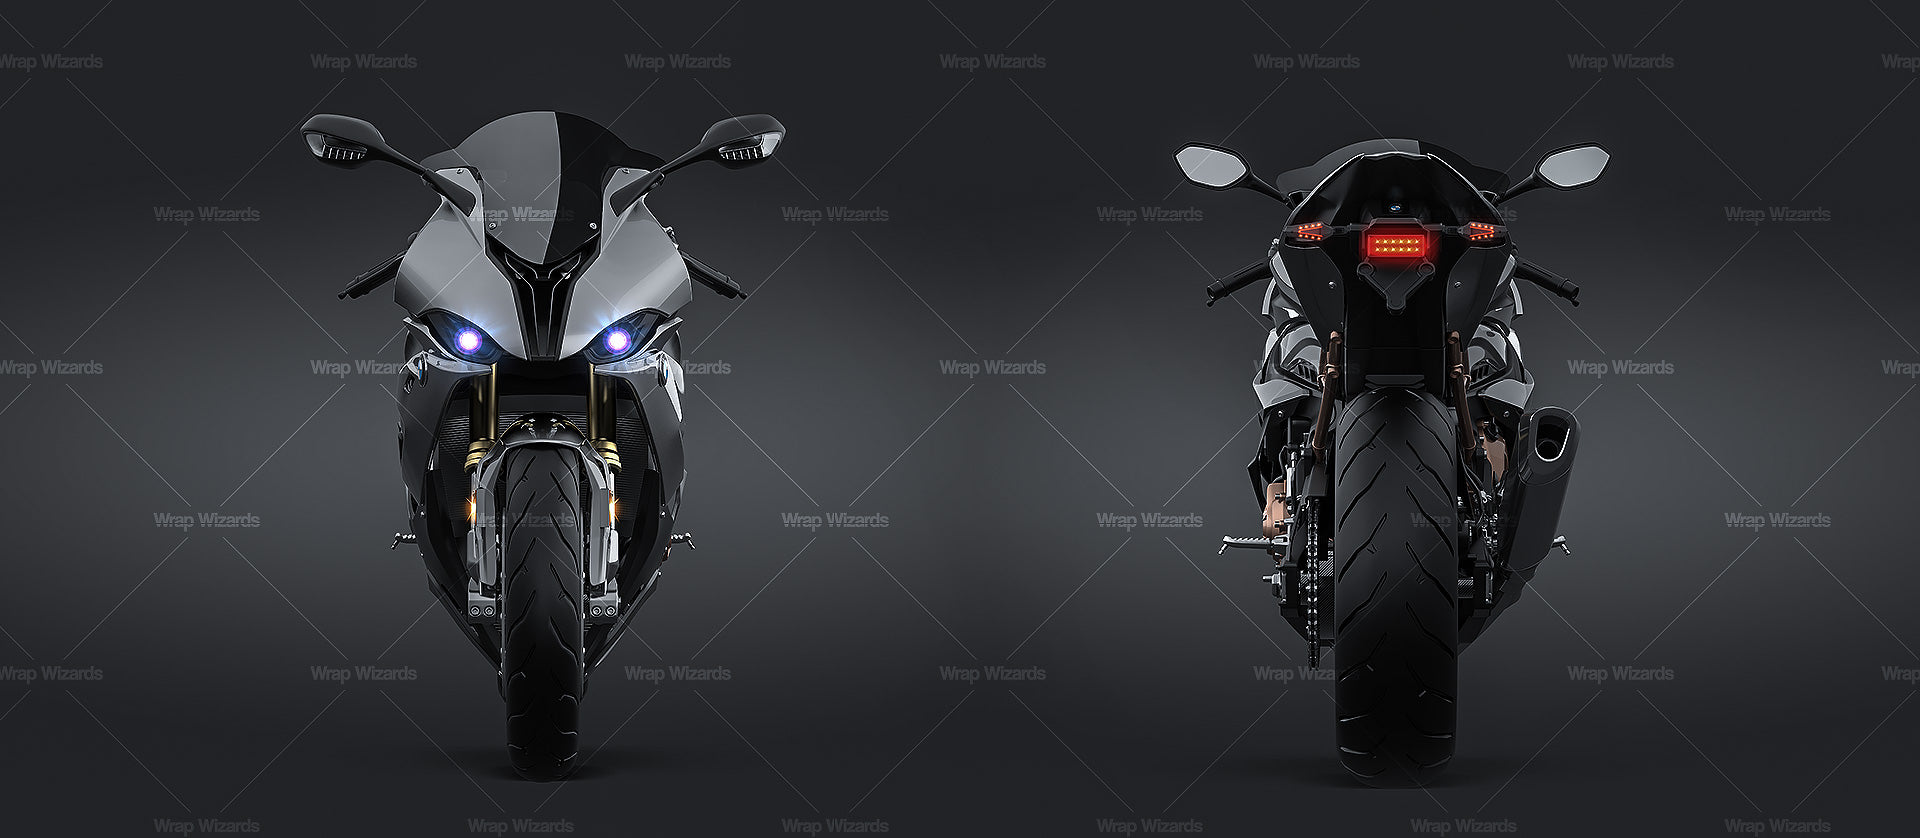 BMW S1000RR 2019 glossy finish - all sides Motorcycle Mockup Template.psd